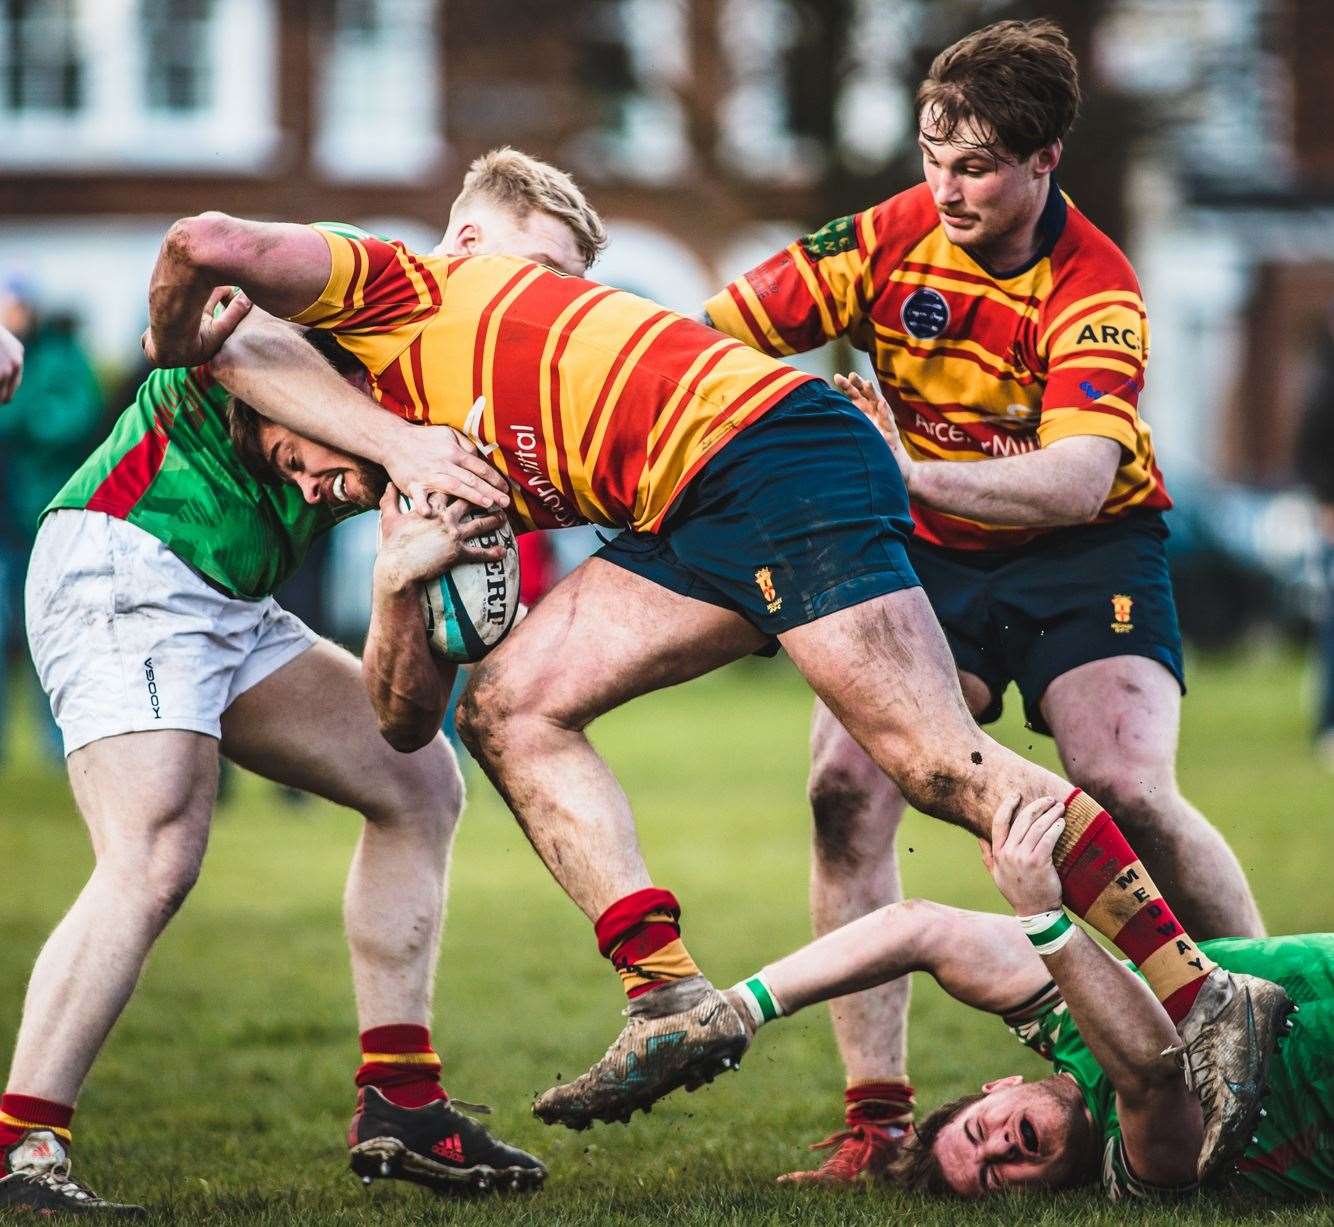 Max Bullock at the heart of the action for Medway at Battersea Ironsides. Picture: Jake Miles Sports Photography